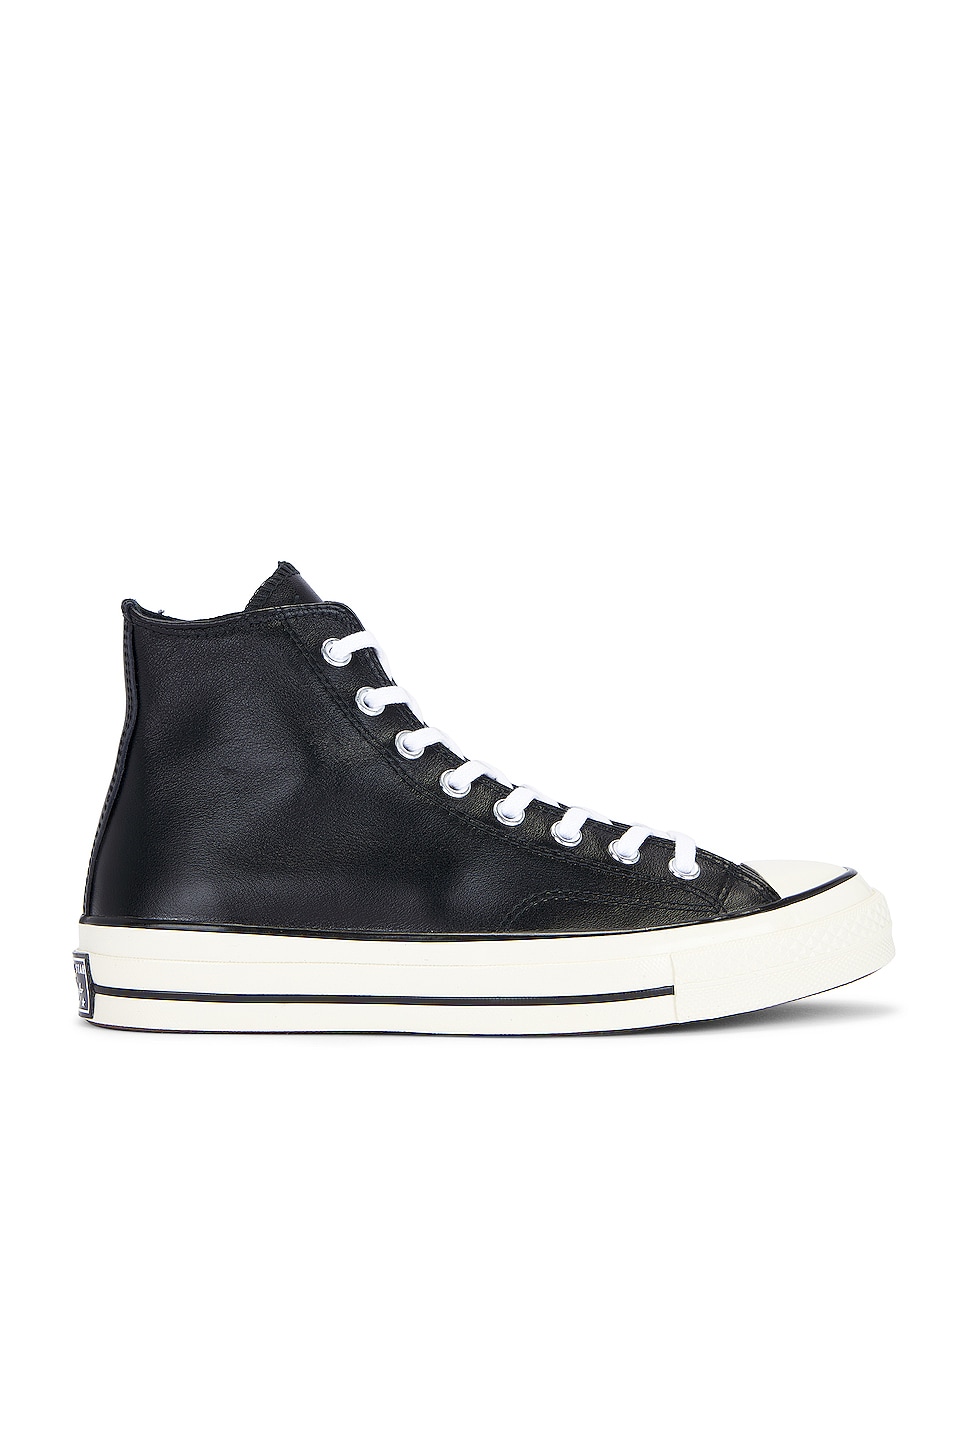 Image 1 of Converse Chuck 70 Leather in Black, White, & Egret